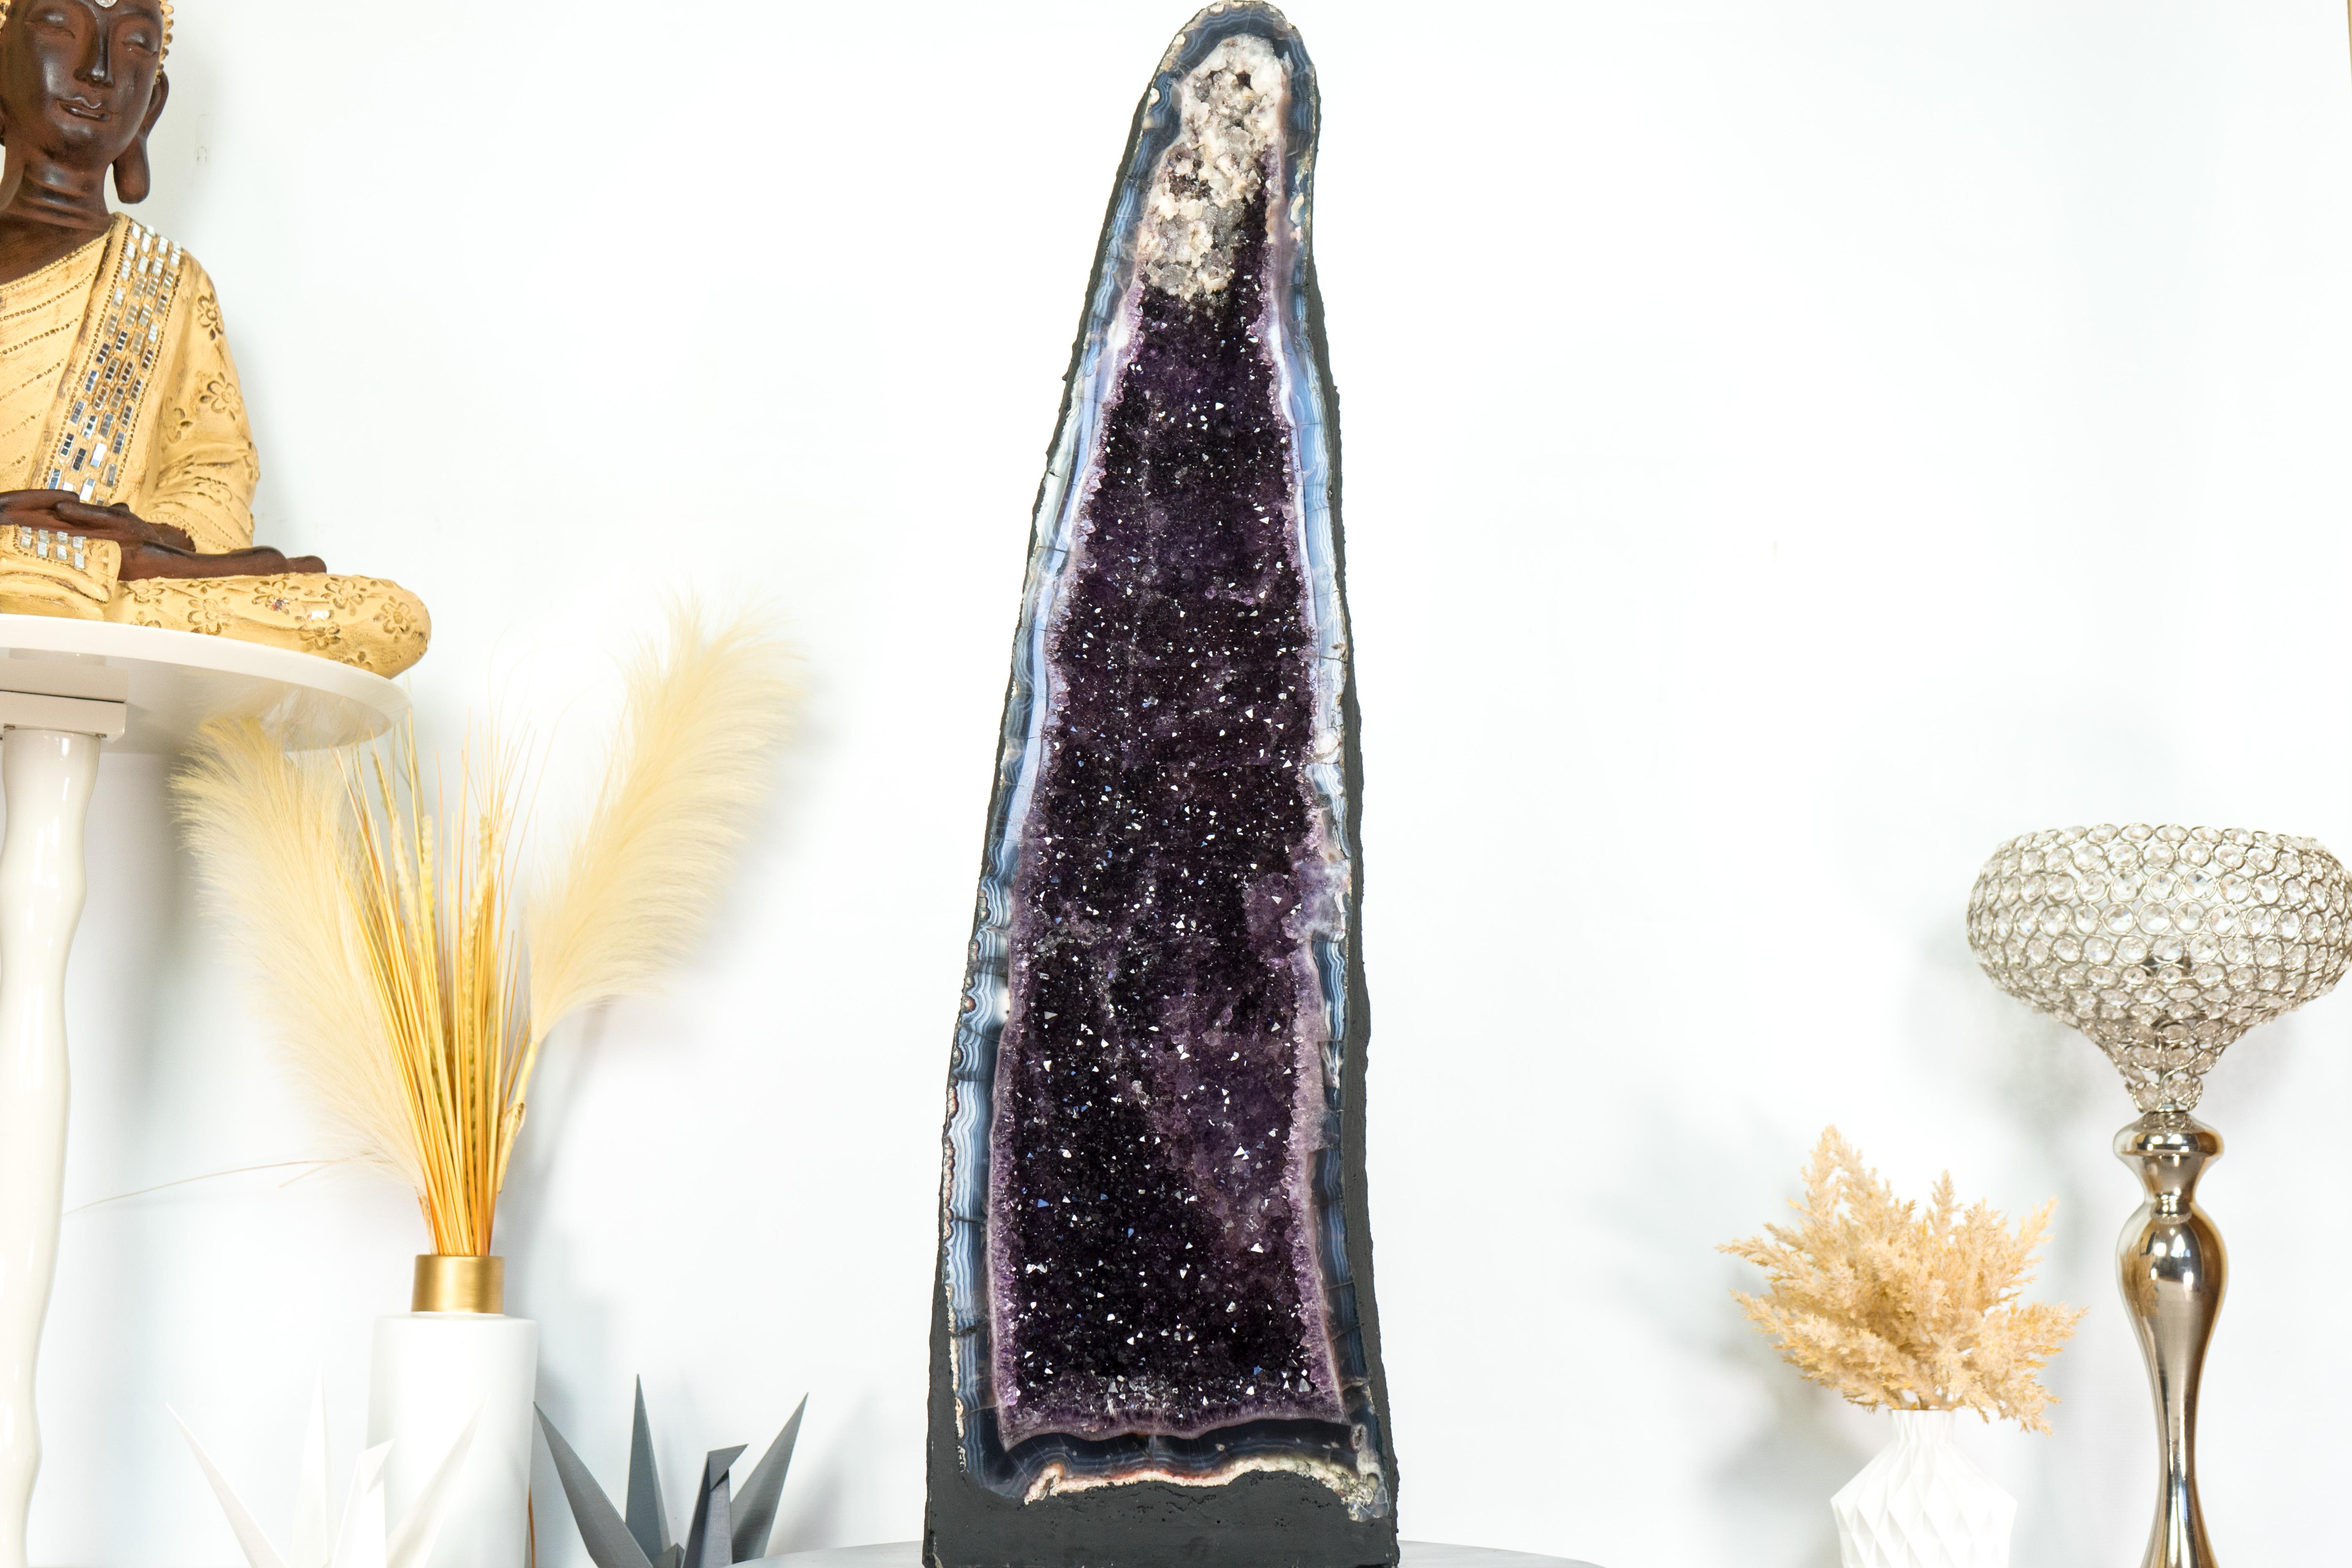 Deep Purple Amethyst Cathedral Geode, with Lace Agate and Calcite, Large & Tall For Sale 7